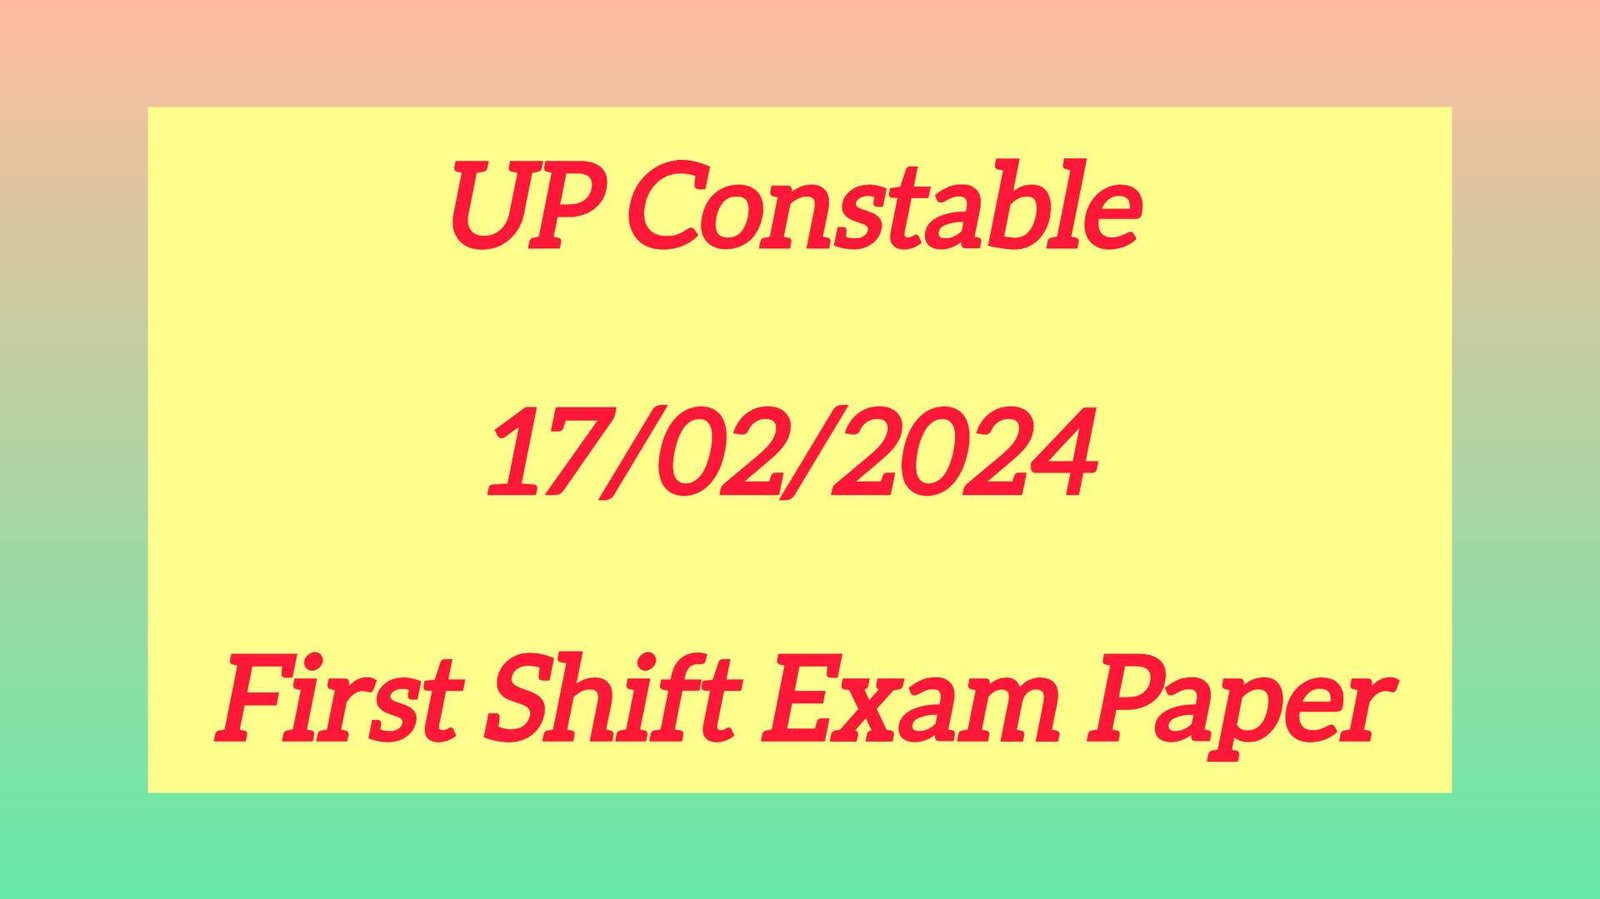 Upp constable first shift exam paper